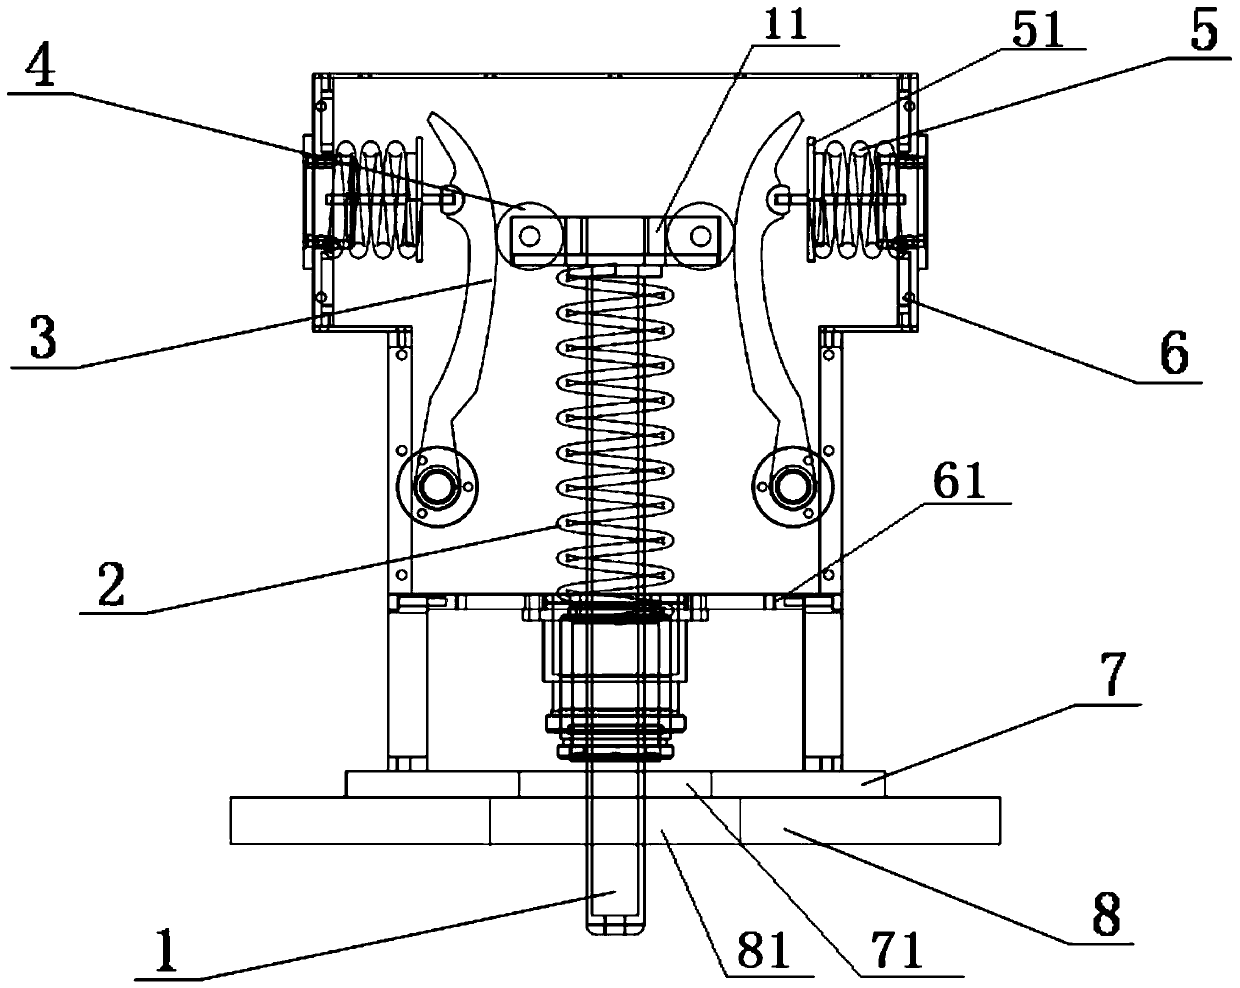 A three-dimensional zero-gravity simulation device combining knife-type cam constant force spring and air-floating thrust bearing